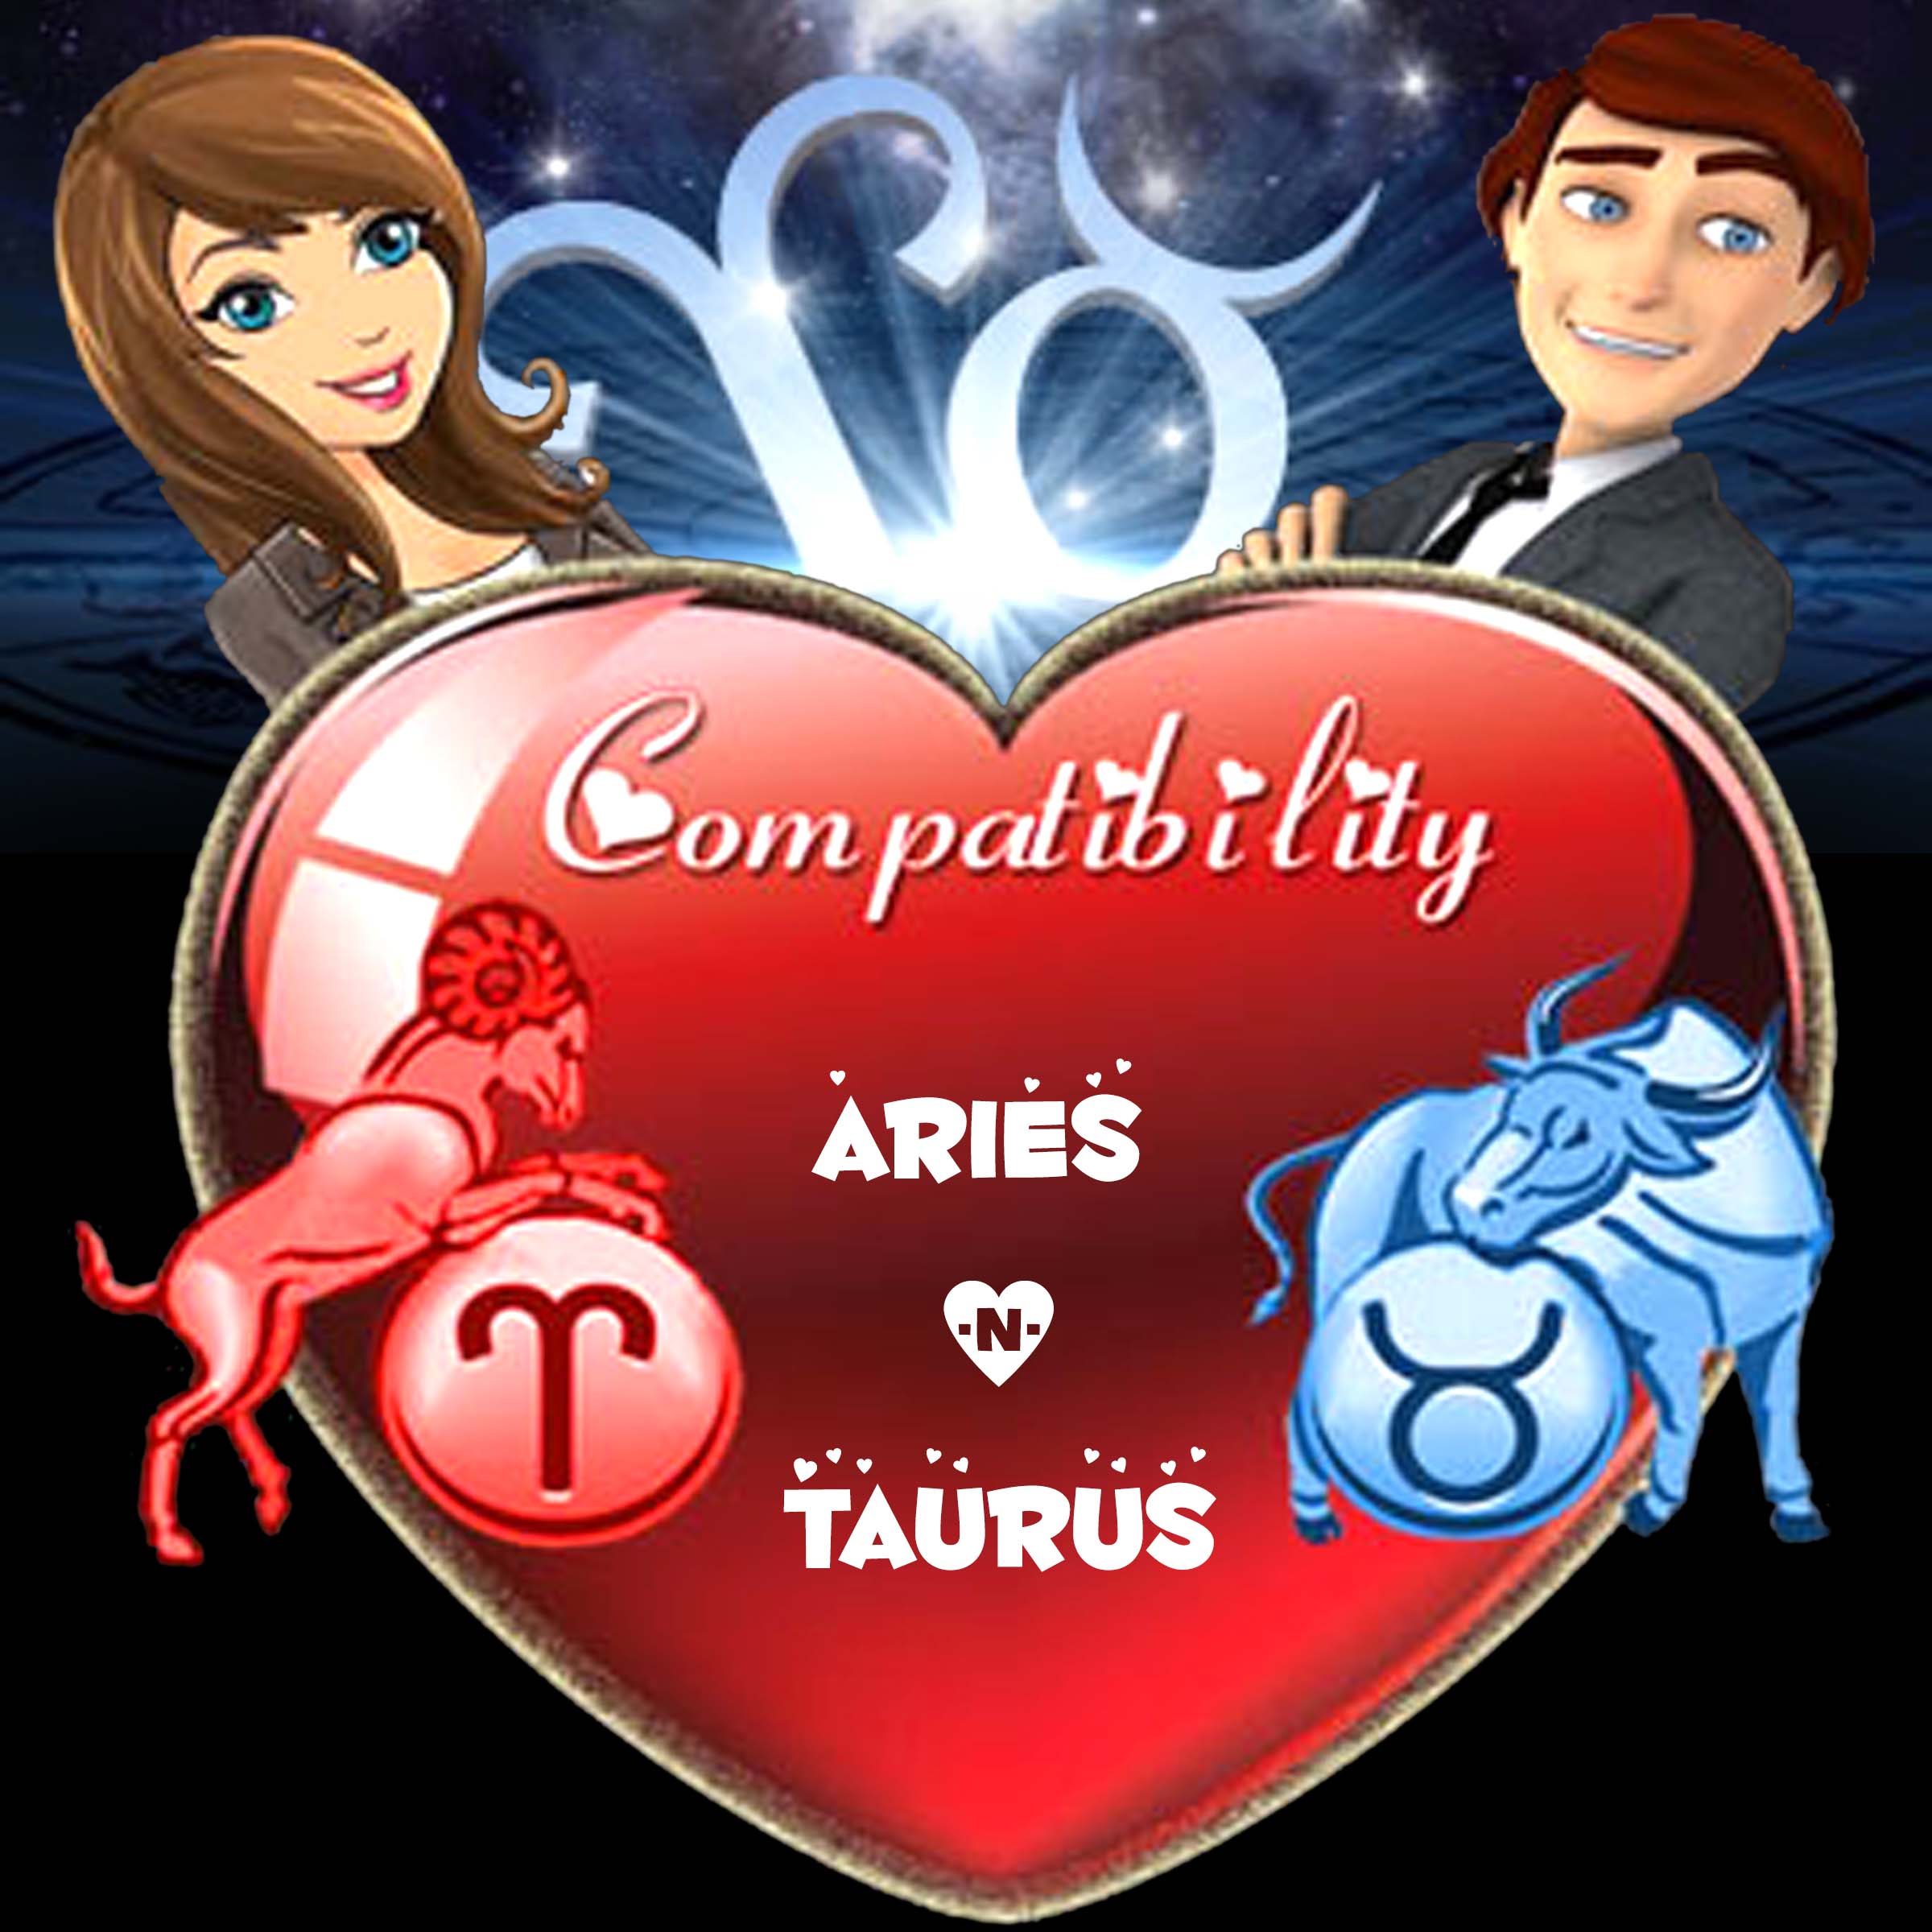 Aries Taurus Know how compatible you are